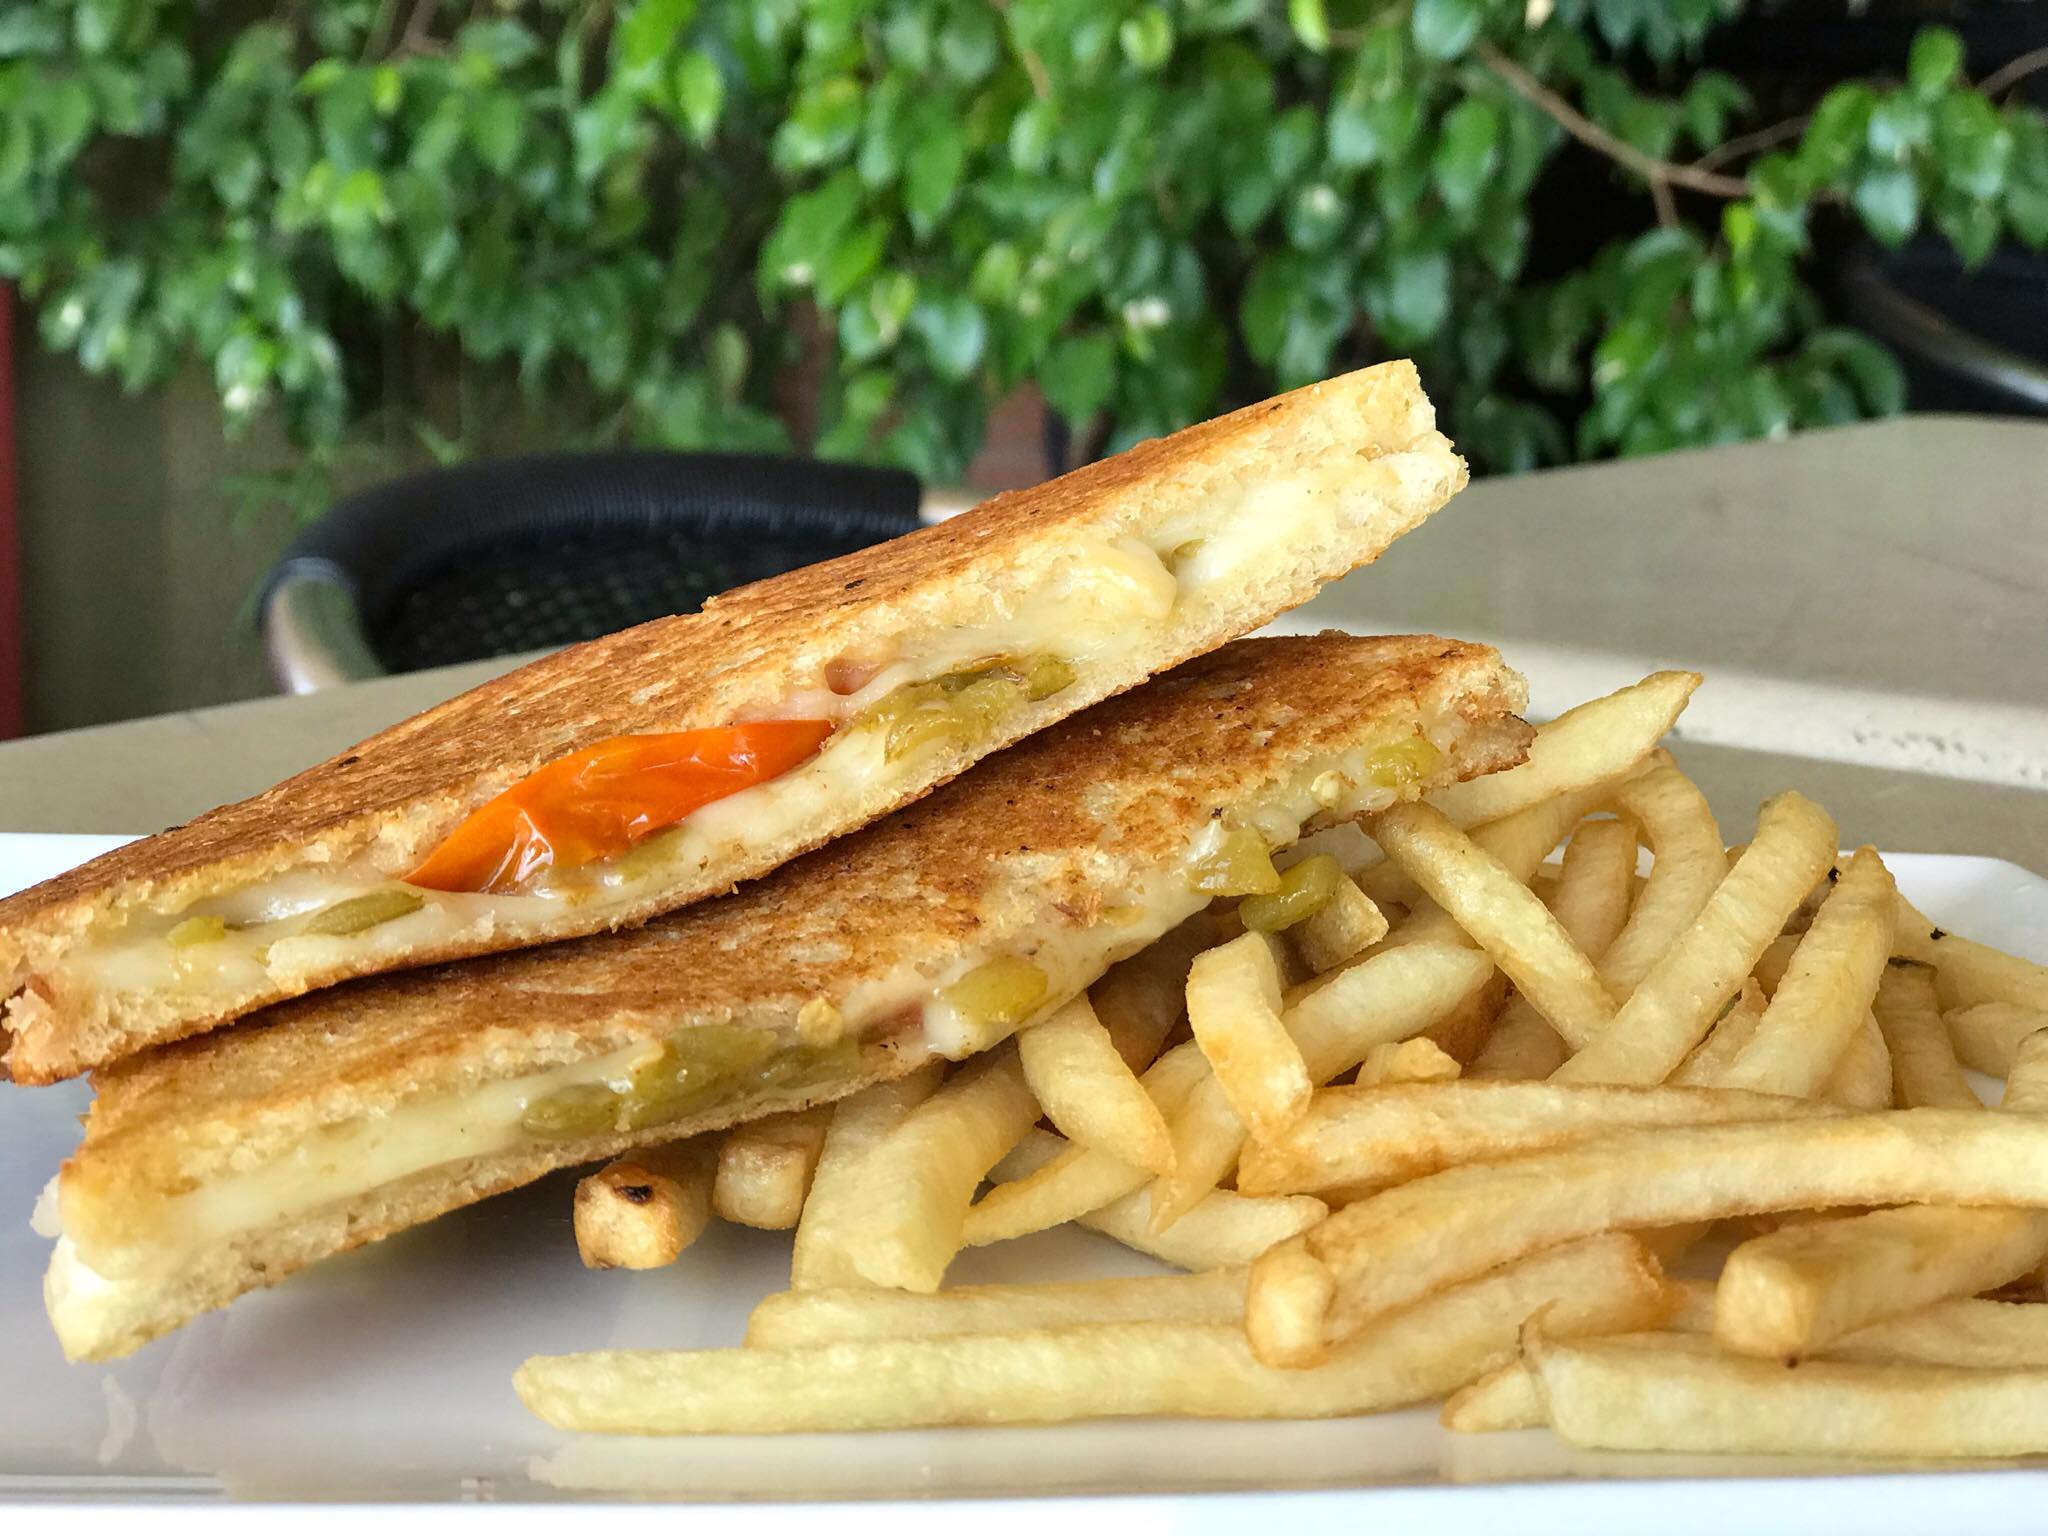 Green Chile and Tomato Grilled Cheese (Credit: Lovin' Spoonfuls)